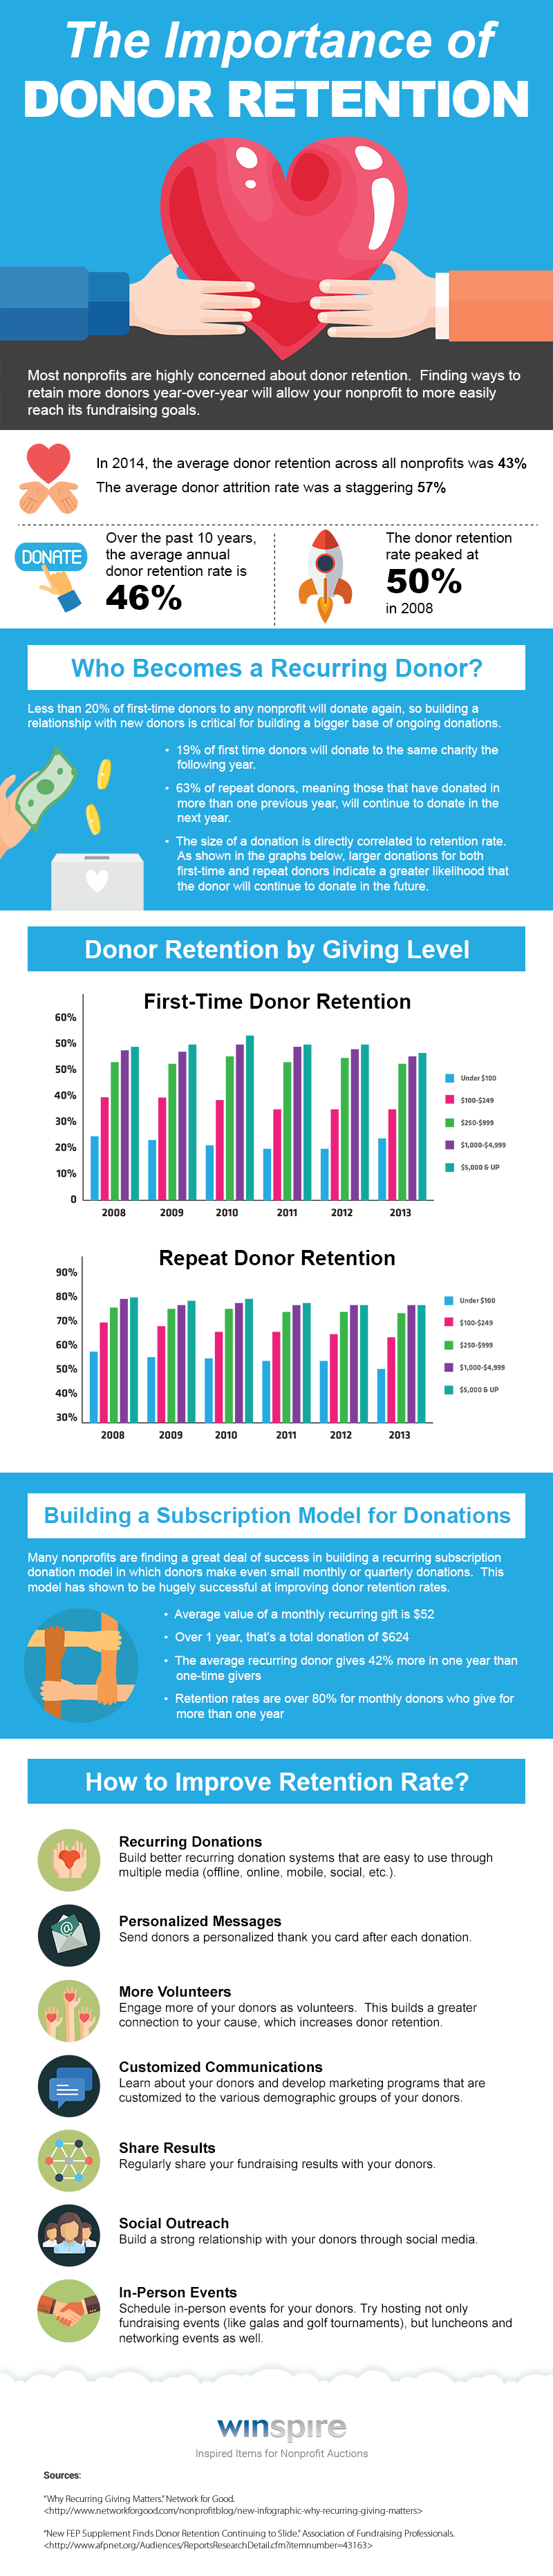 The_Importance_of_Donor_Retention-Infographic.png